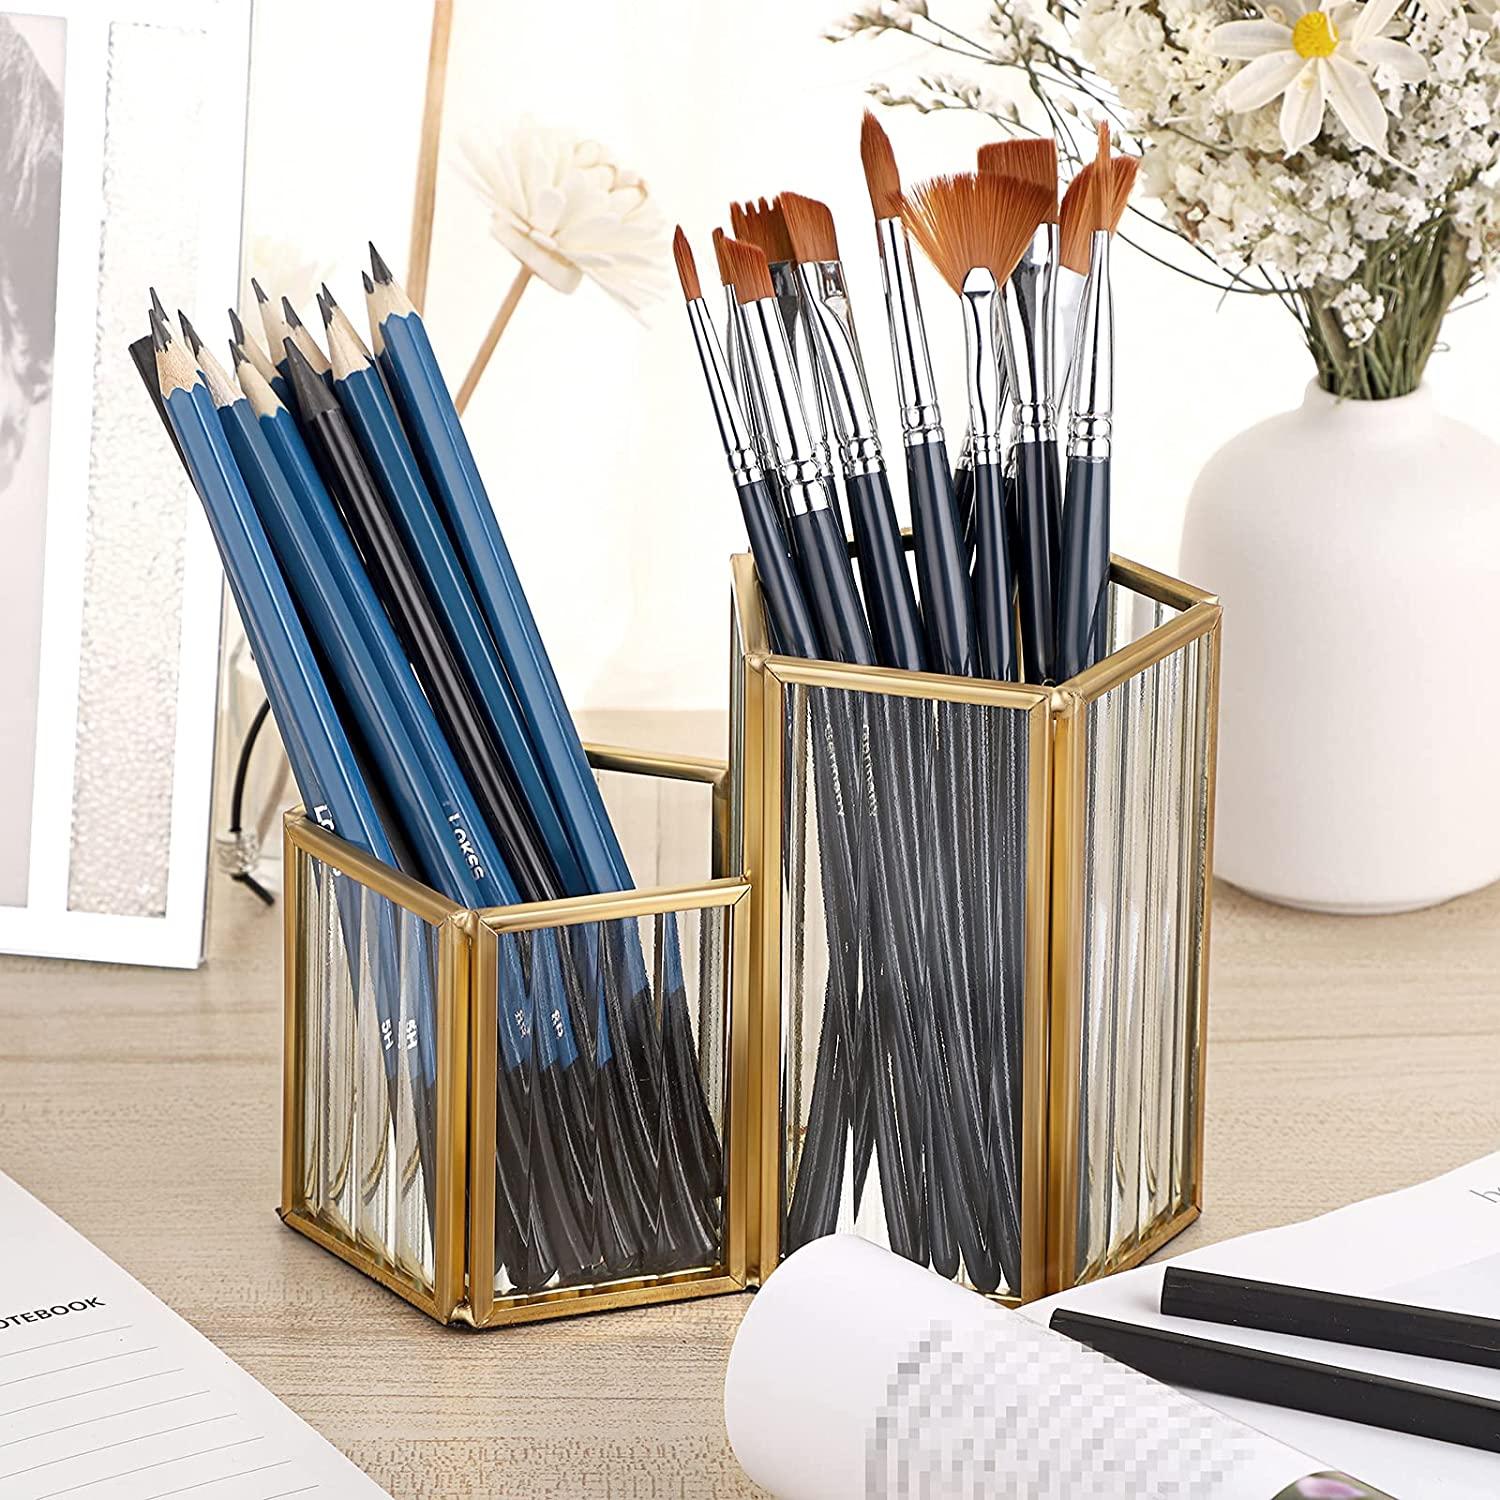 Pen and Pencil Holder Small World Makeup Brush Holder Marker Holder Pen and Pencil  Case 